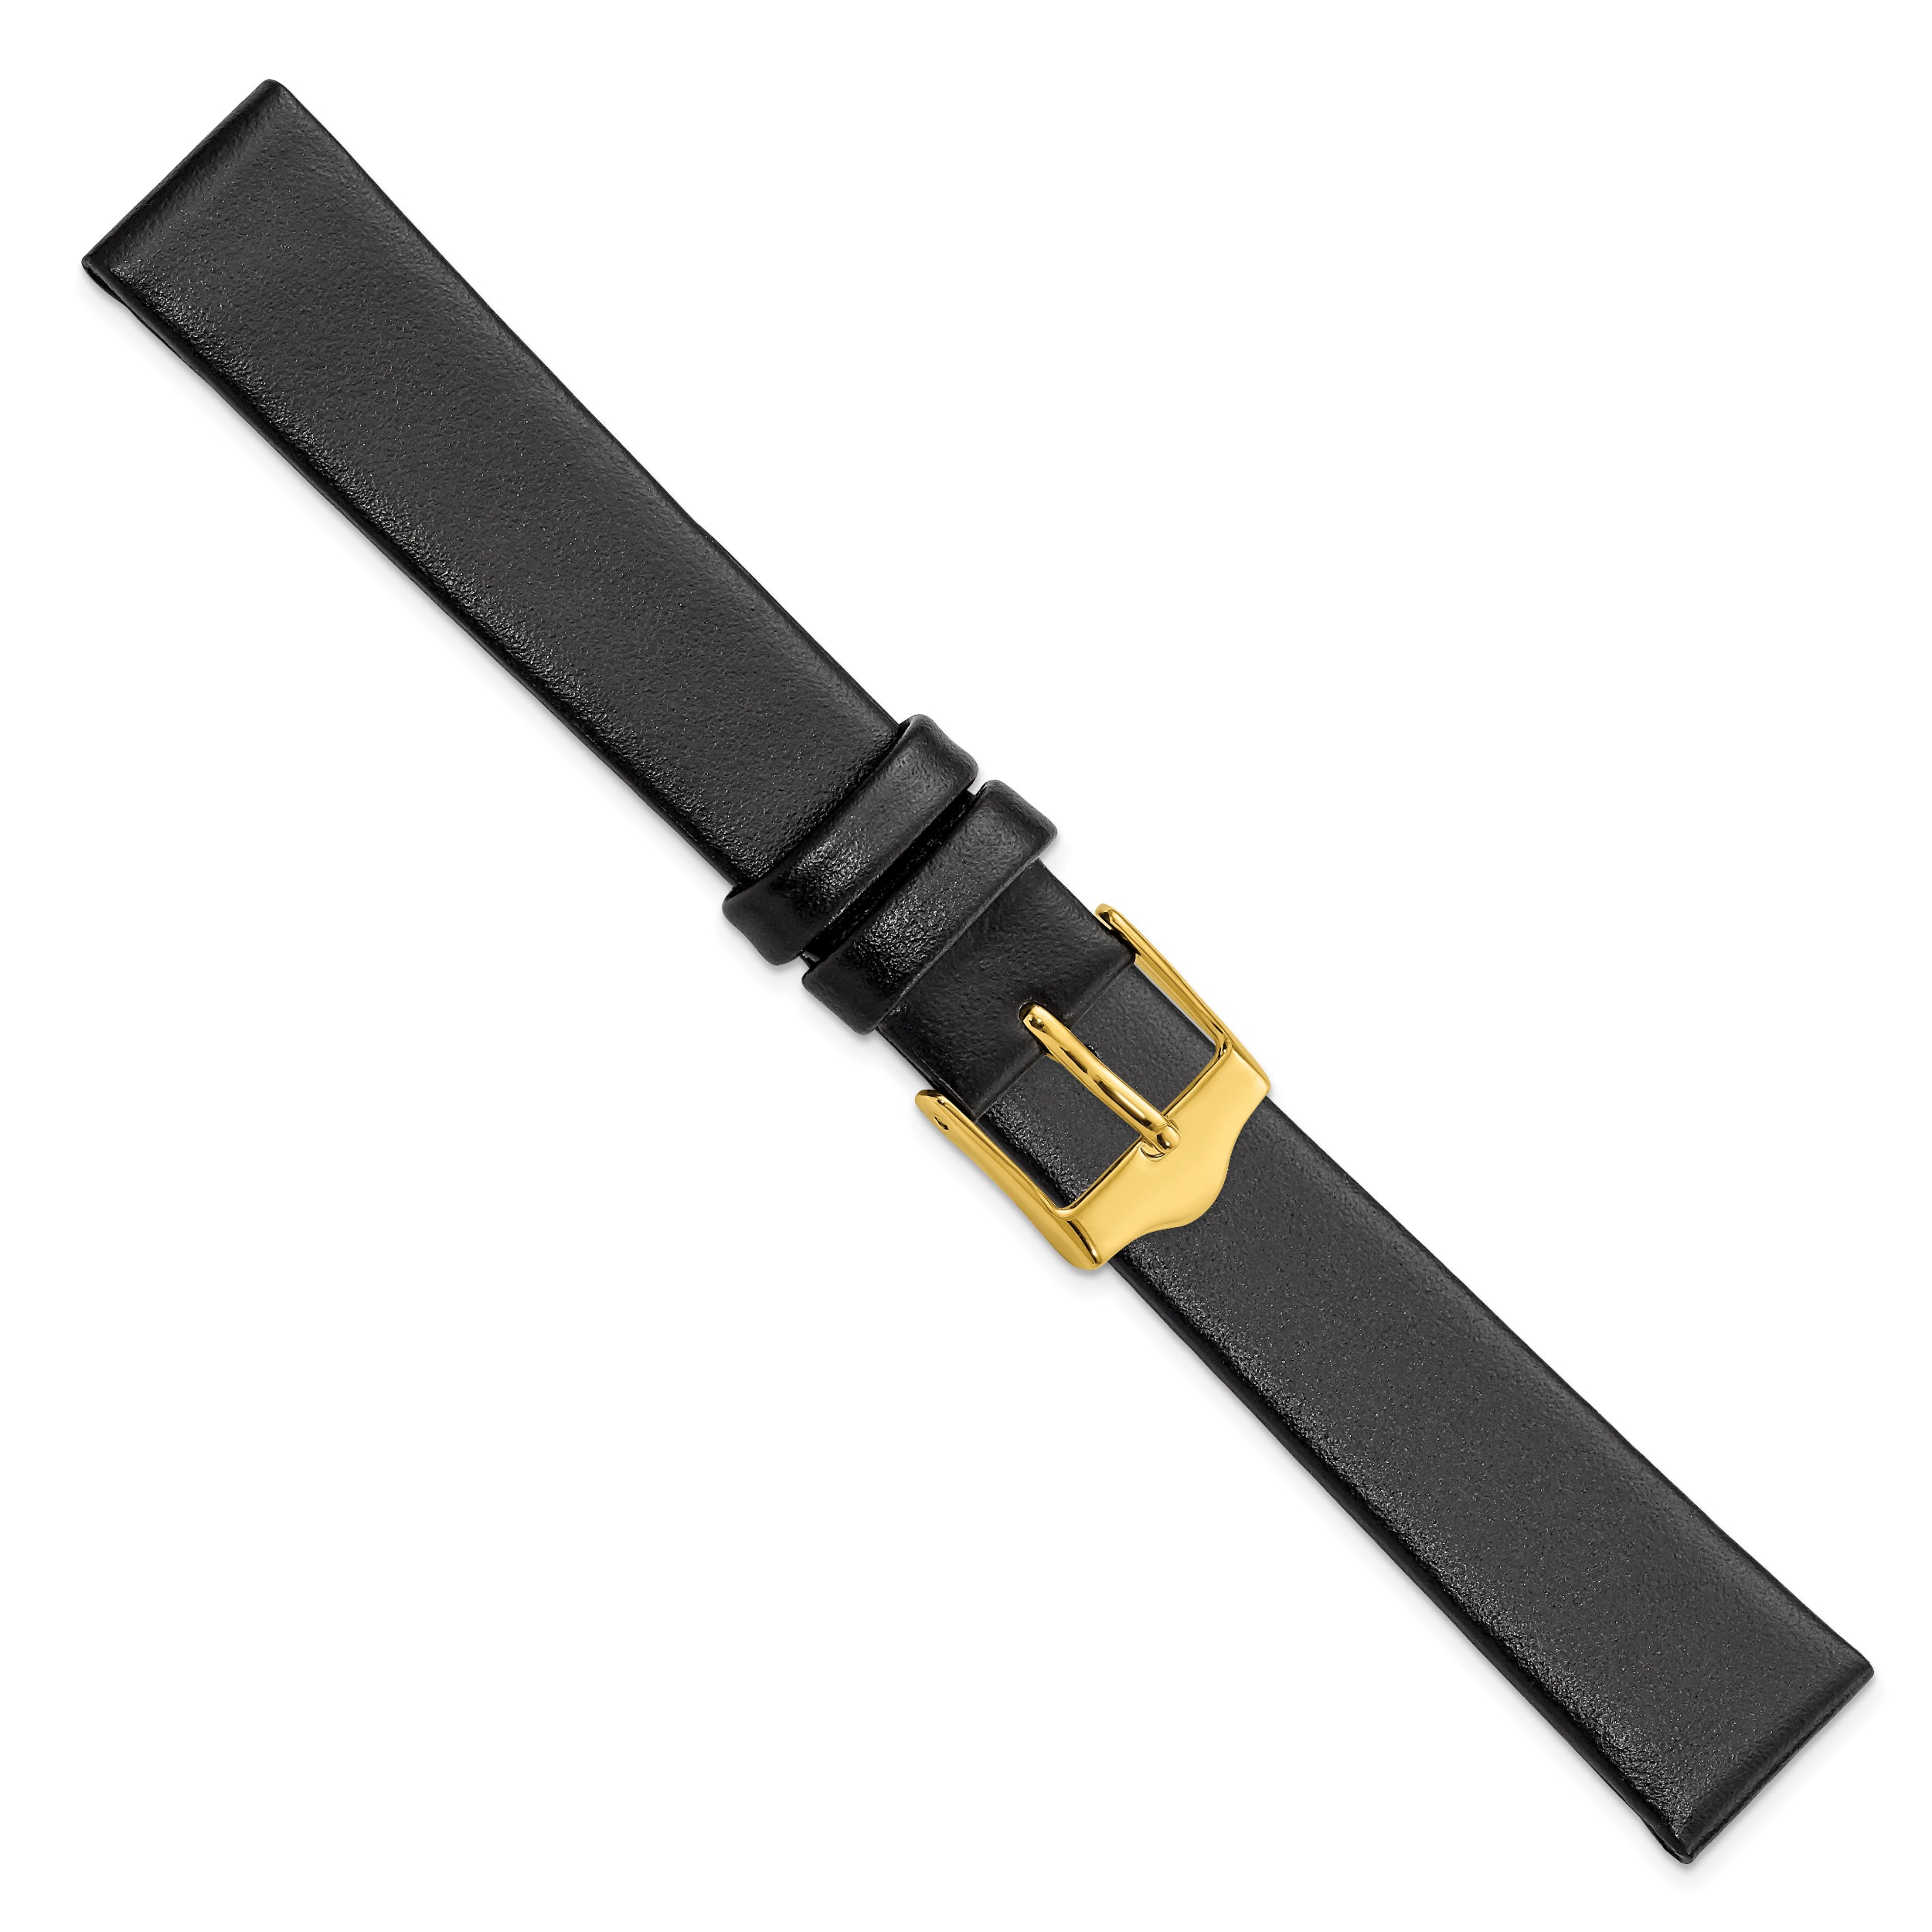 12mm Black Smooth Flat Leather with Gold-tone Buckle Watch 6.75 inch Band